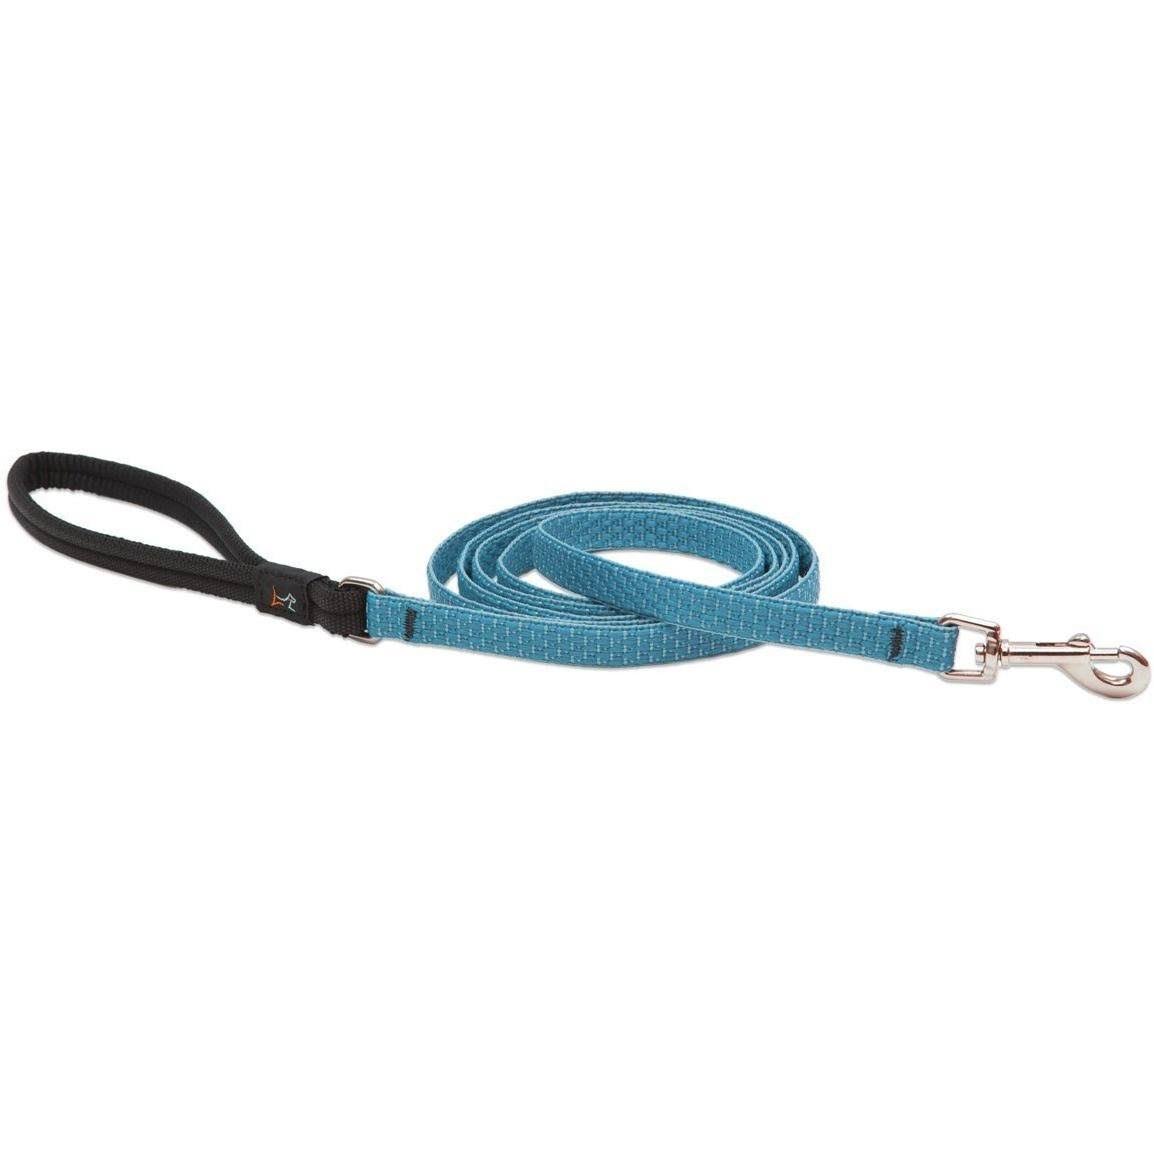 LUPINE INC Eco Dog Leash Tropical Sea Pattern 1/2-In. x 6-Ft. 36339